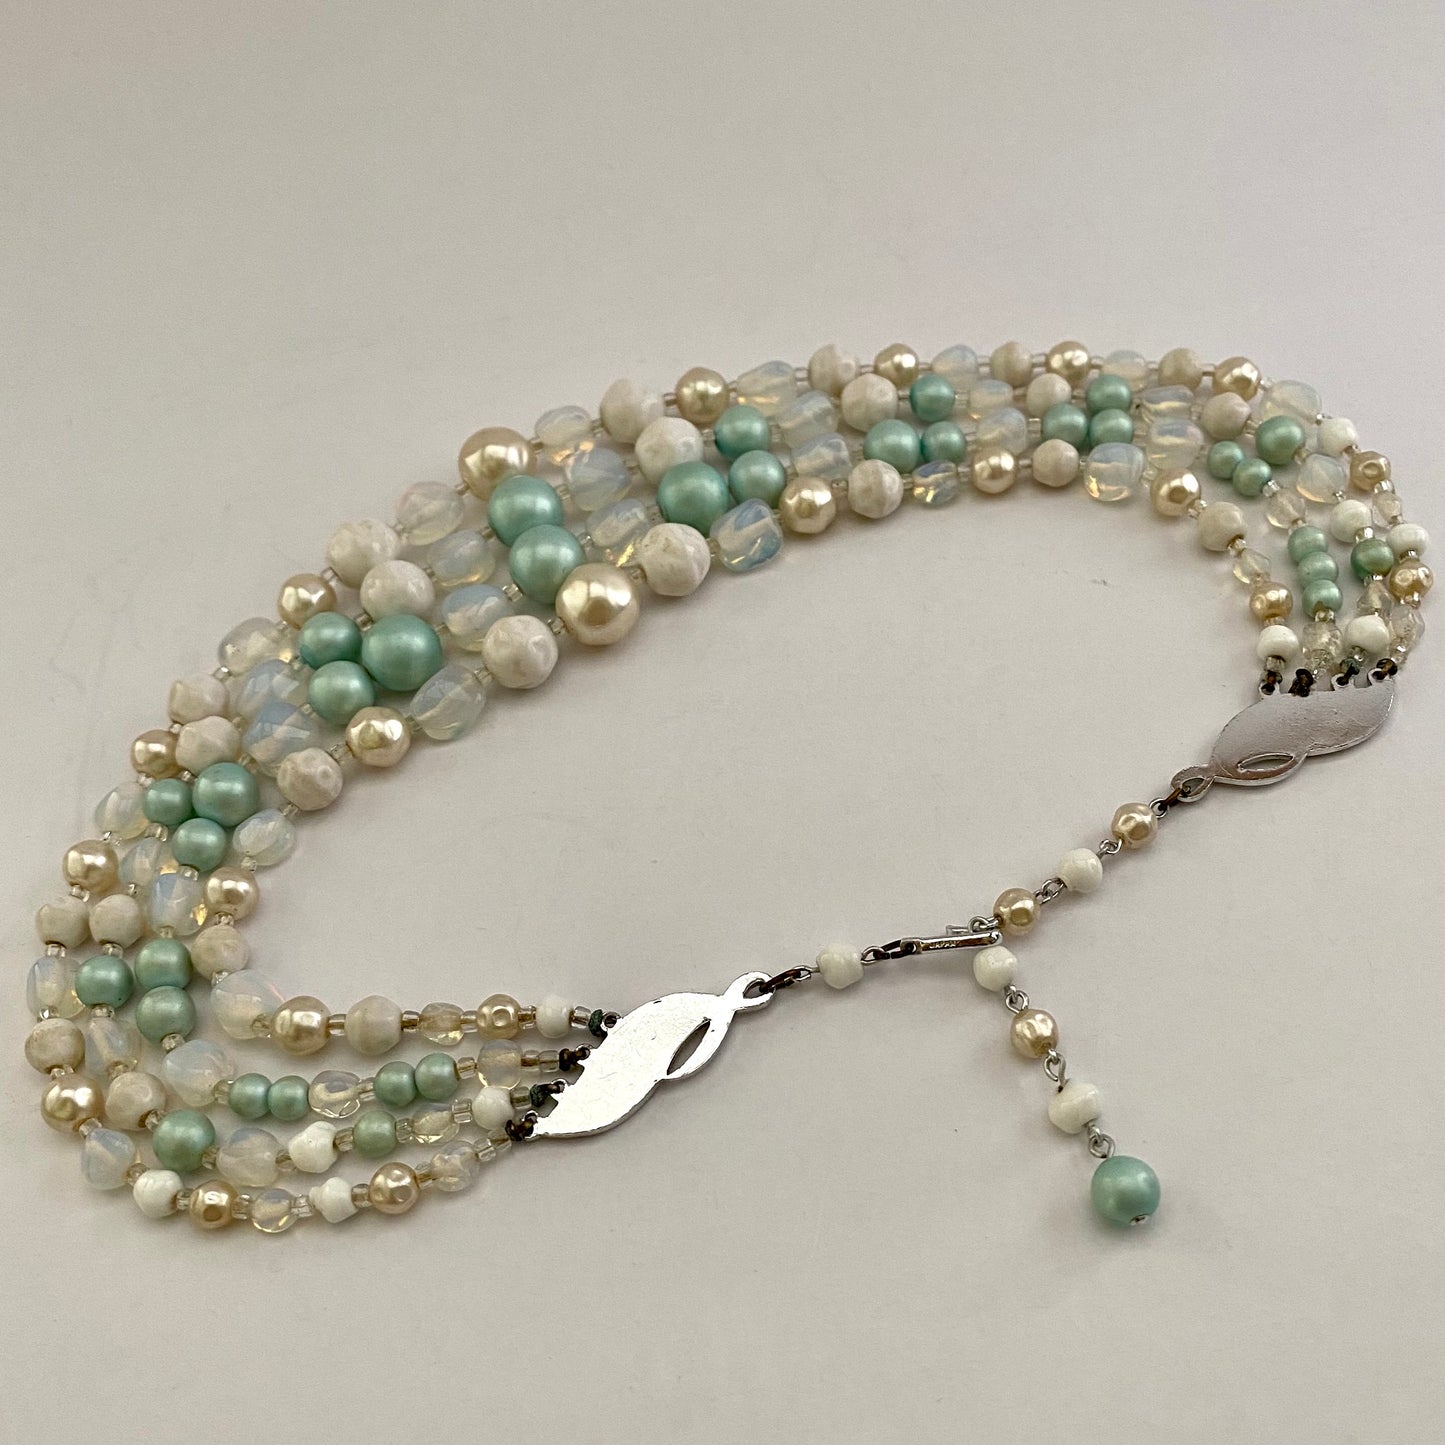 1960s Japan 4-Strand Bead Necklace